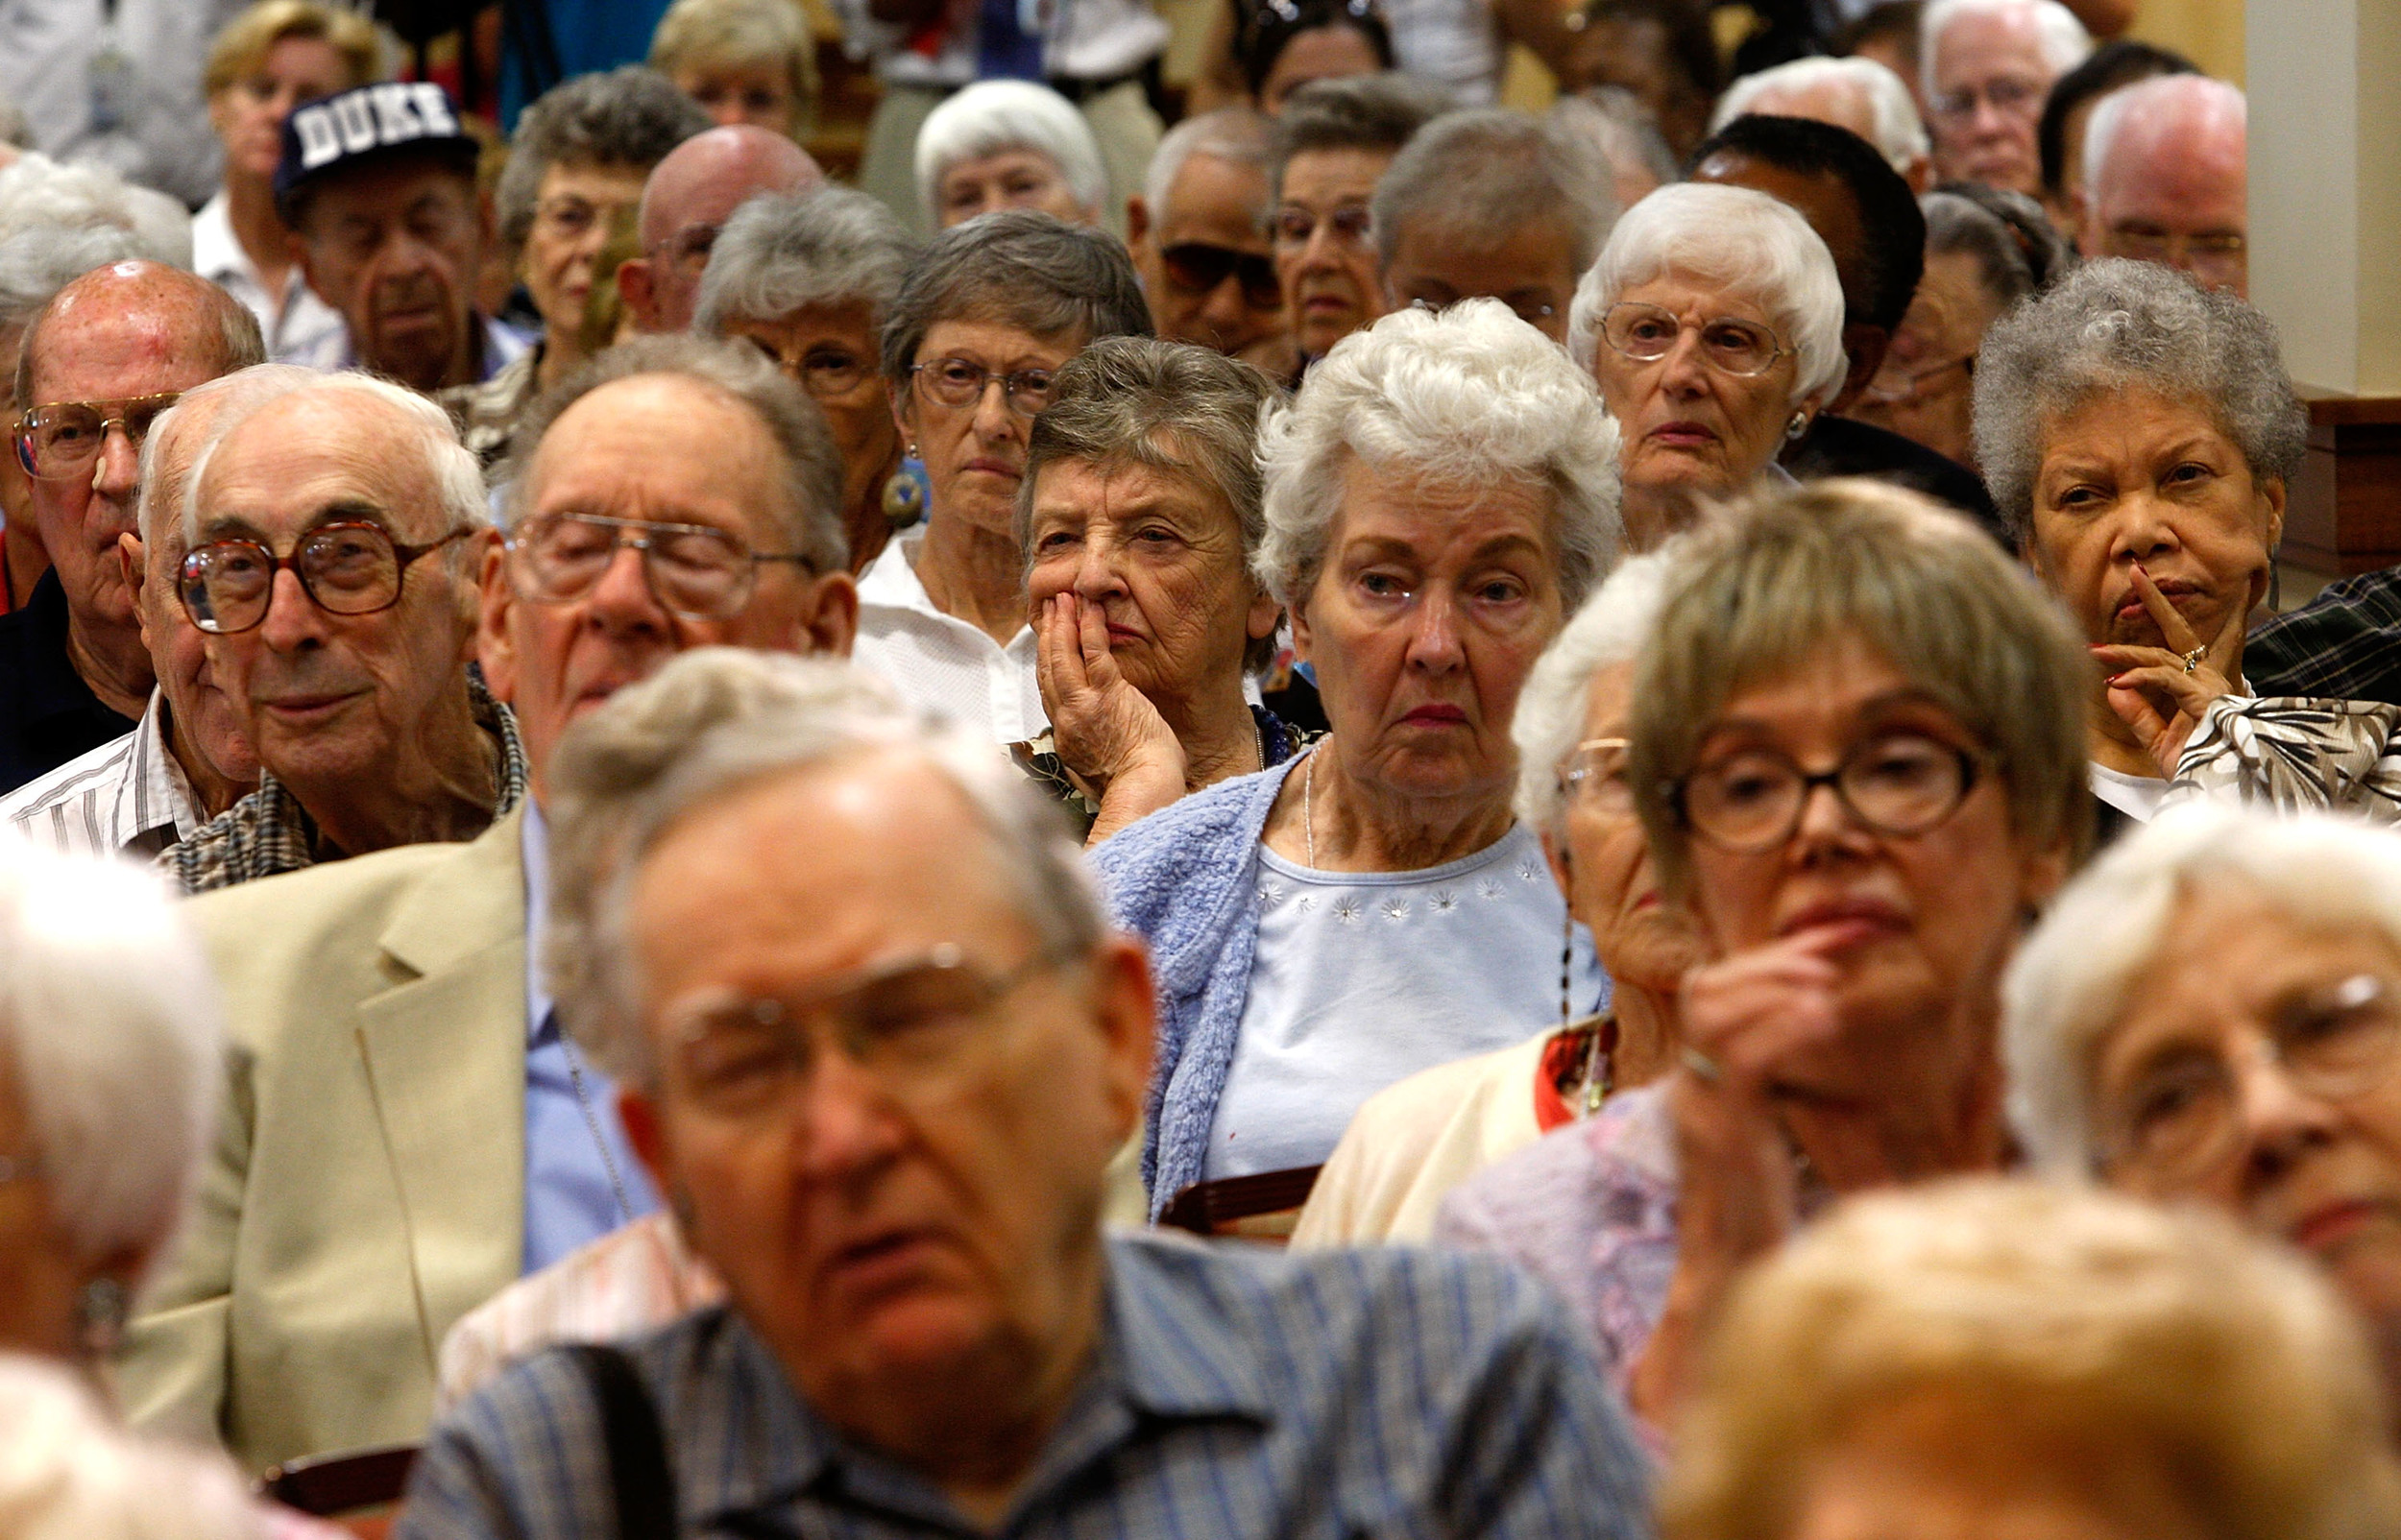 SPRINGFIELD, VA - AUGUST 25:  Residents listen during a health care forum at Greenspring Retirement Community August 25, 2009 in Springfield, Virginia. Congressional members from across the country have returned to their own district to listen to voters' opinions on healthcare reform.  (Photo by Alex Wong/Getty Images)